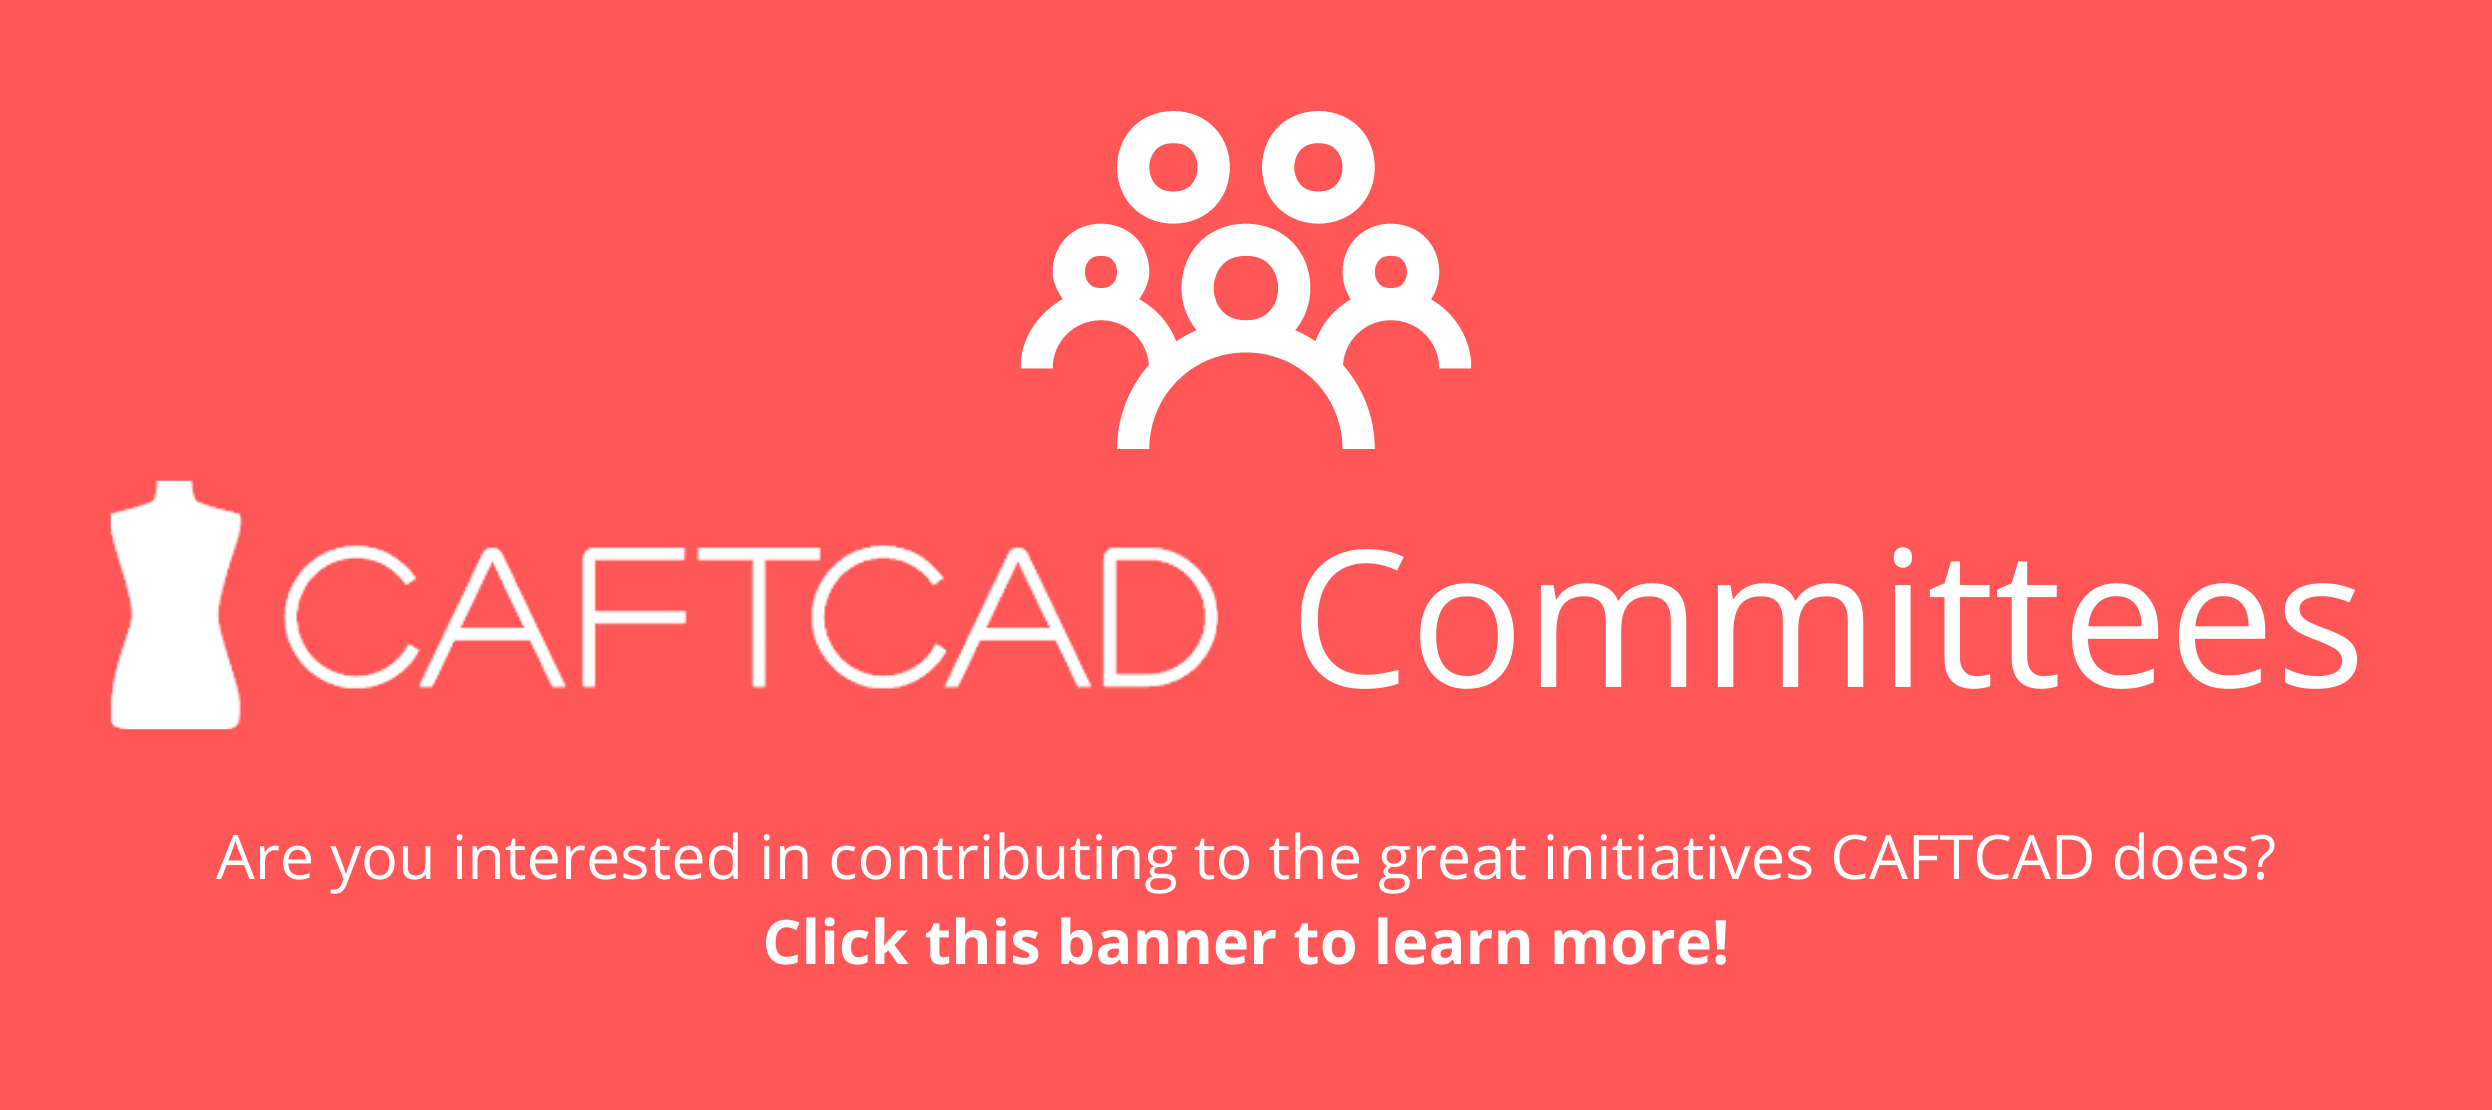 CAFTCAD Committees Banner for Homepage.png